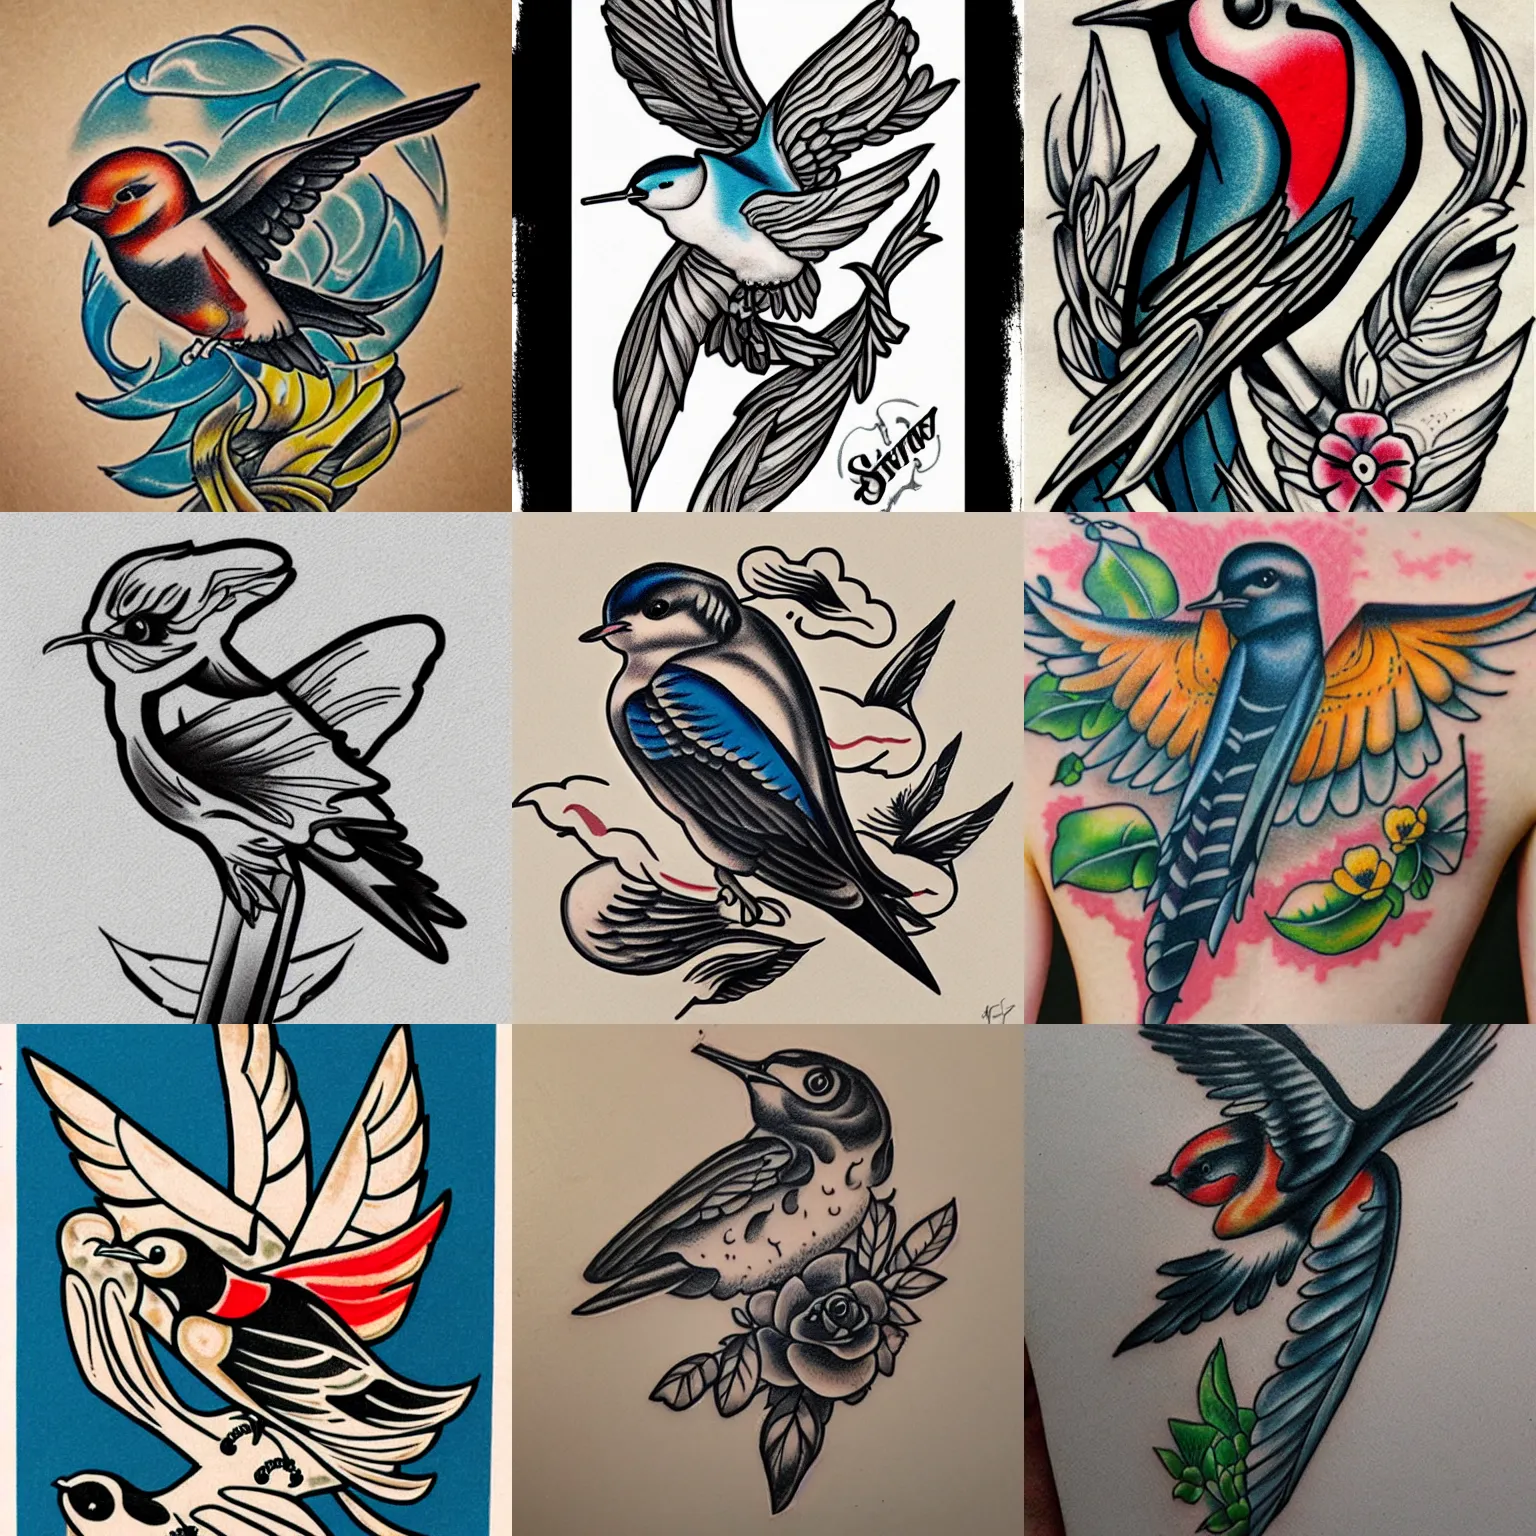 The History and Meaning Behind Swallow Tattoos - Fair Robin Revival